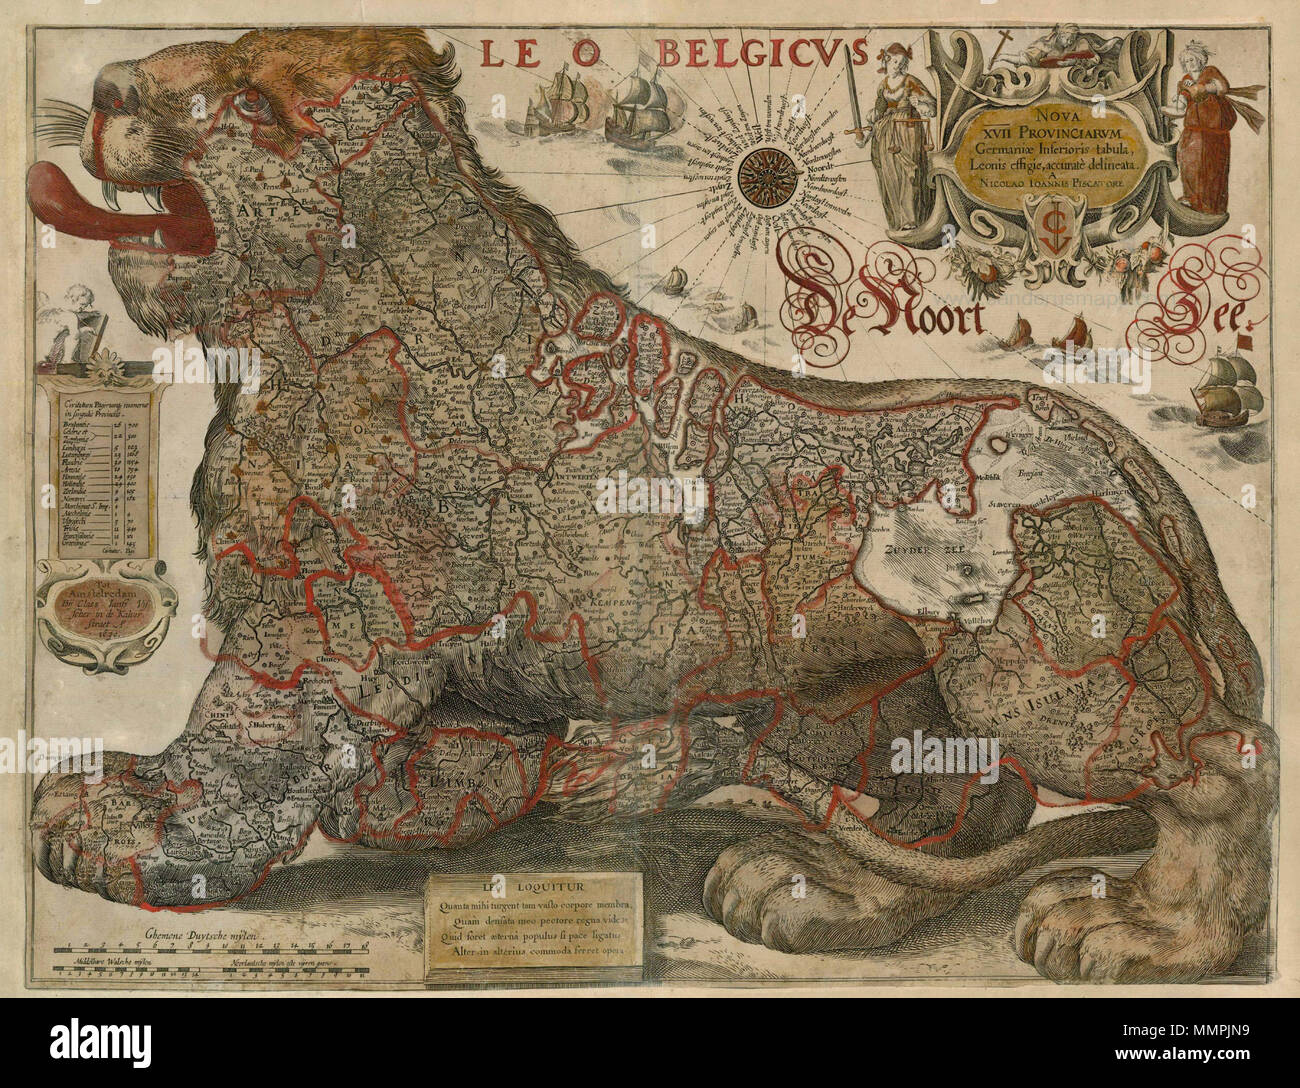 . English: Antique map of Leo Belgicus by Visscher C.J. - Gerritsz 1630.jpg  . 1630. Visscher C.J. - Gerritsz Antique map of Leo Belgicus by Visscher C.J. - Gerritsz 1630 Stock Photo